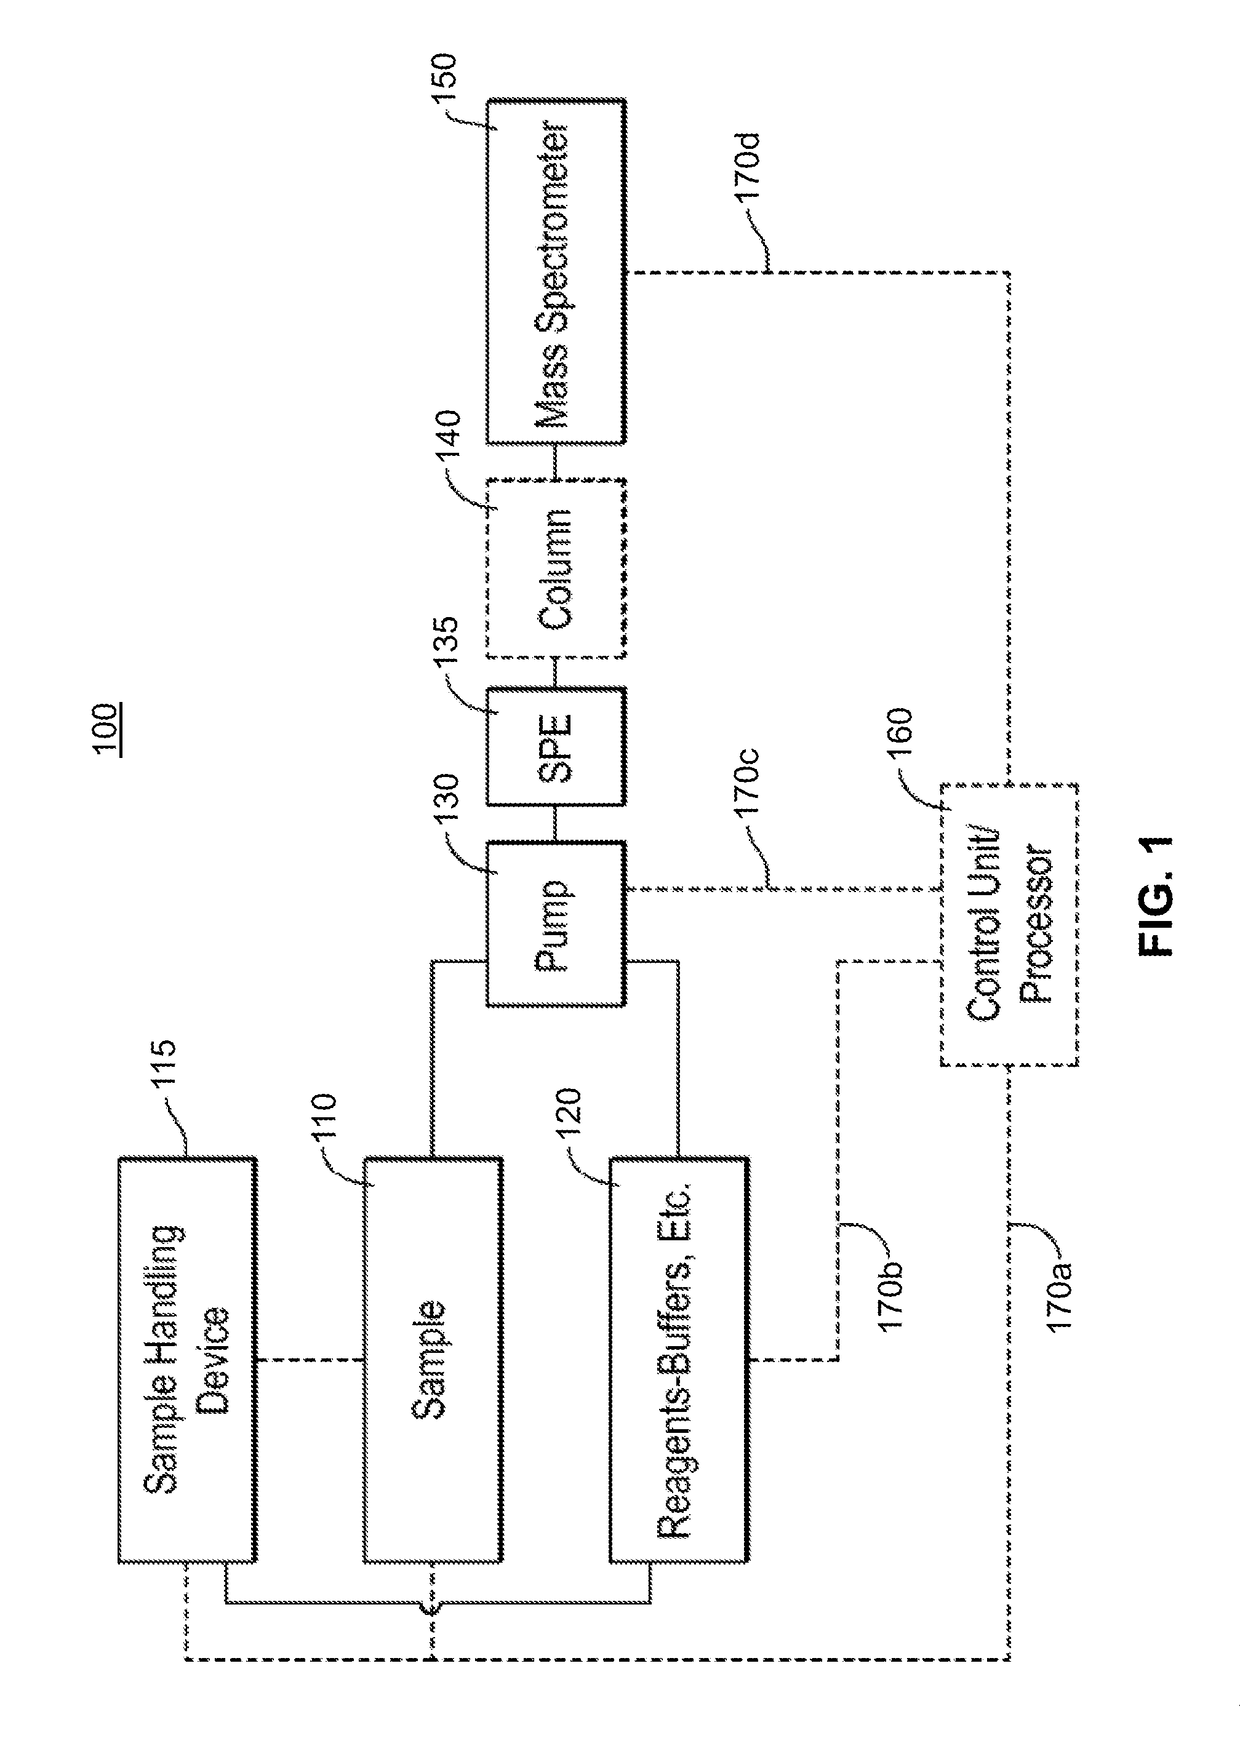 Methods for Mass Spectrometric Based Characterization of Biological Molecules